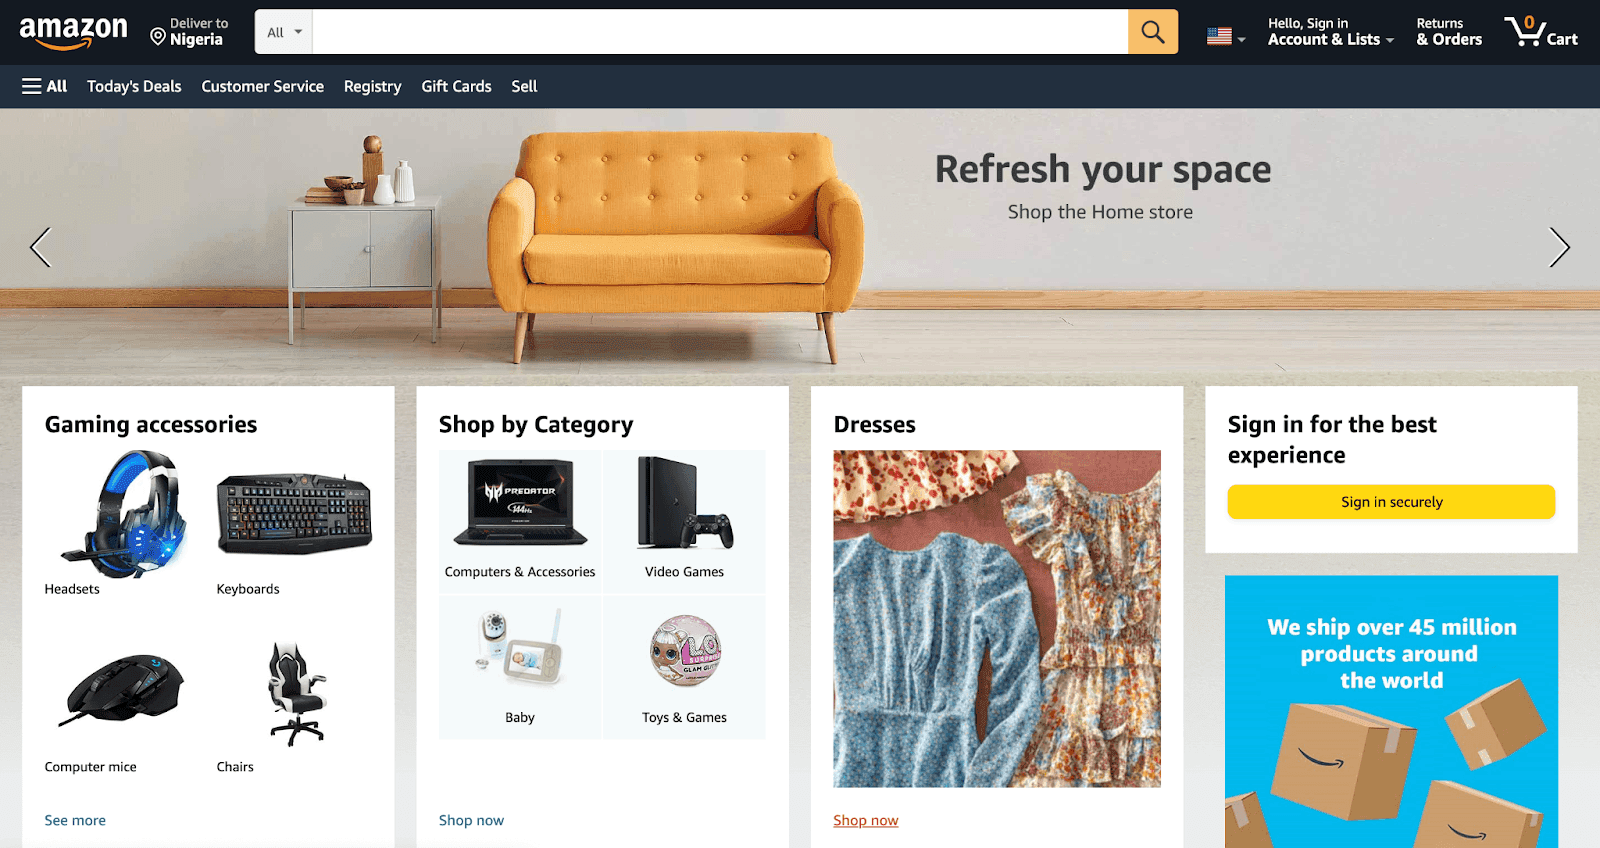 Amazon landing page for all their products